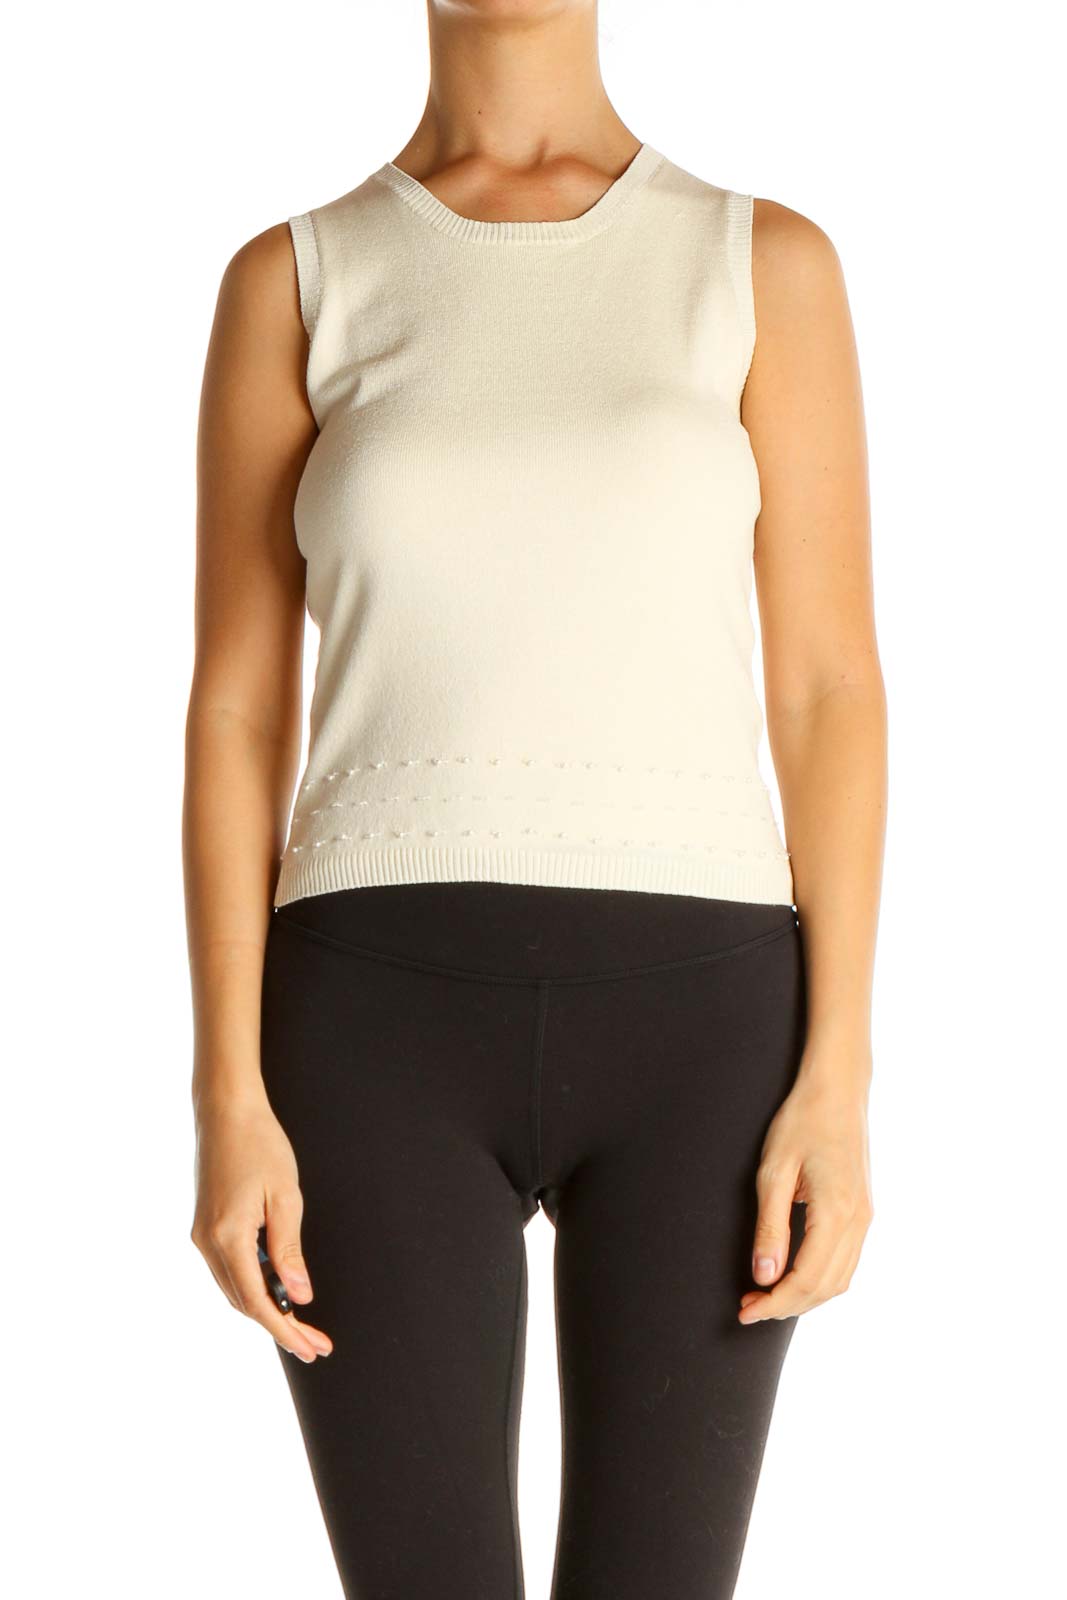 Beige Solid Chic Sweater Front